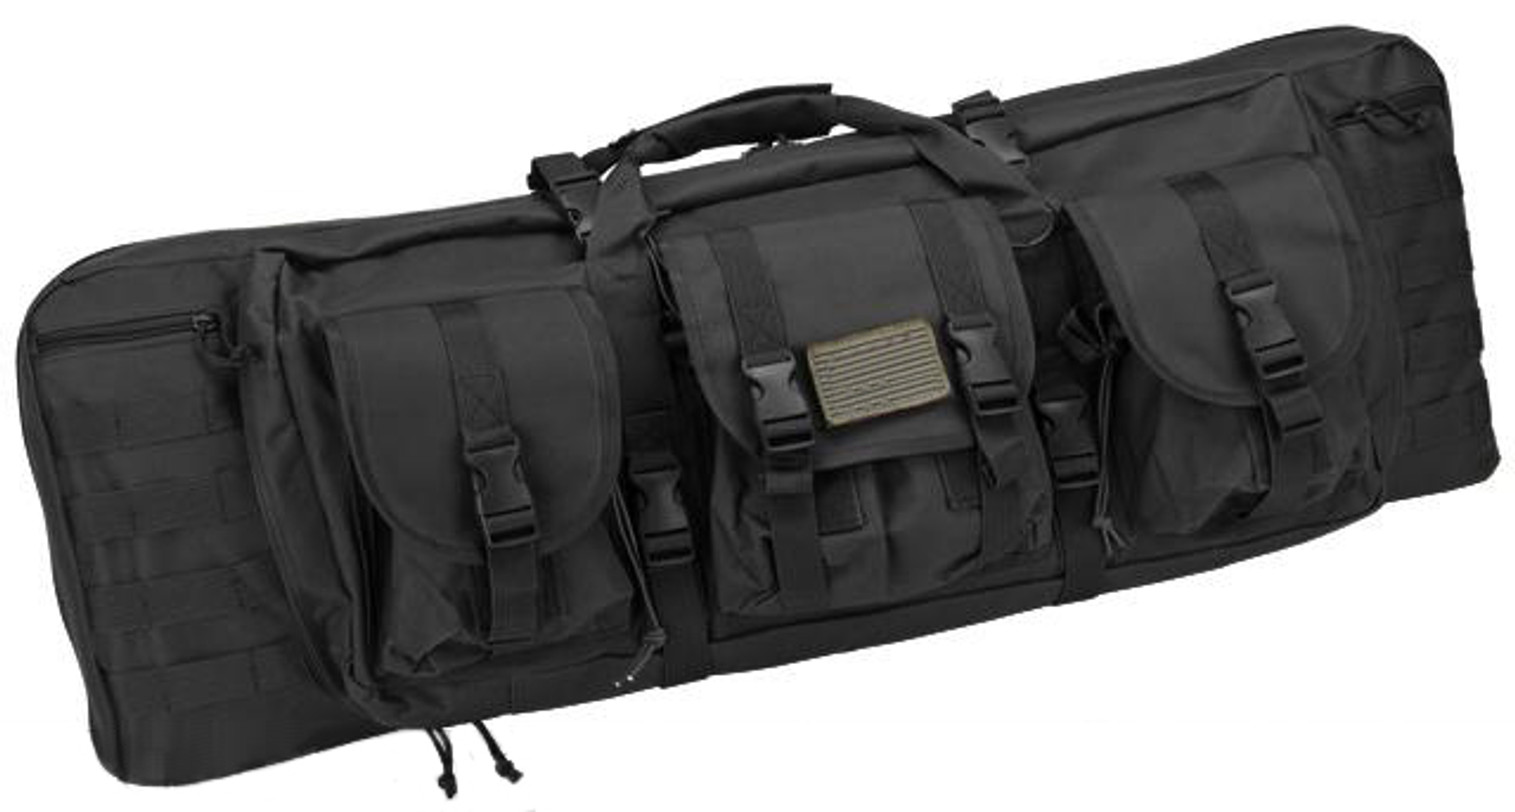 Combat Featured 36" Ultimate Dual Weapon Case Rifle Bag (Black)